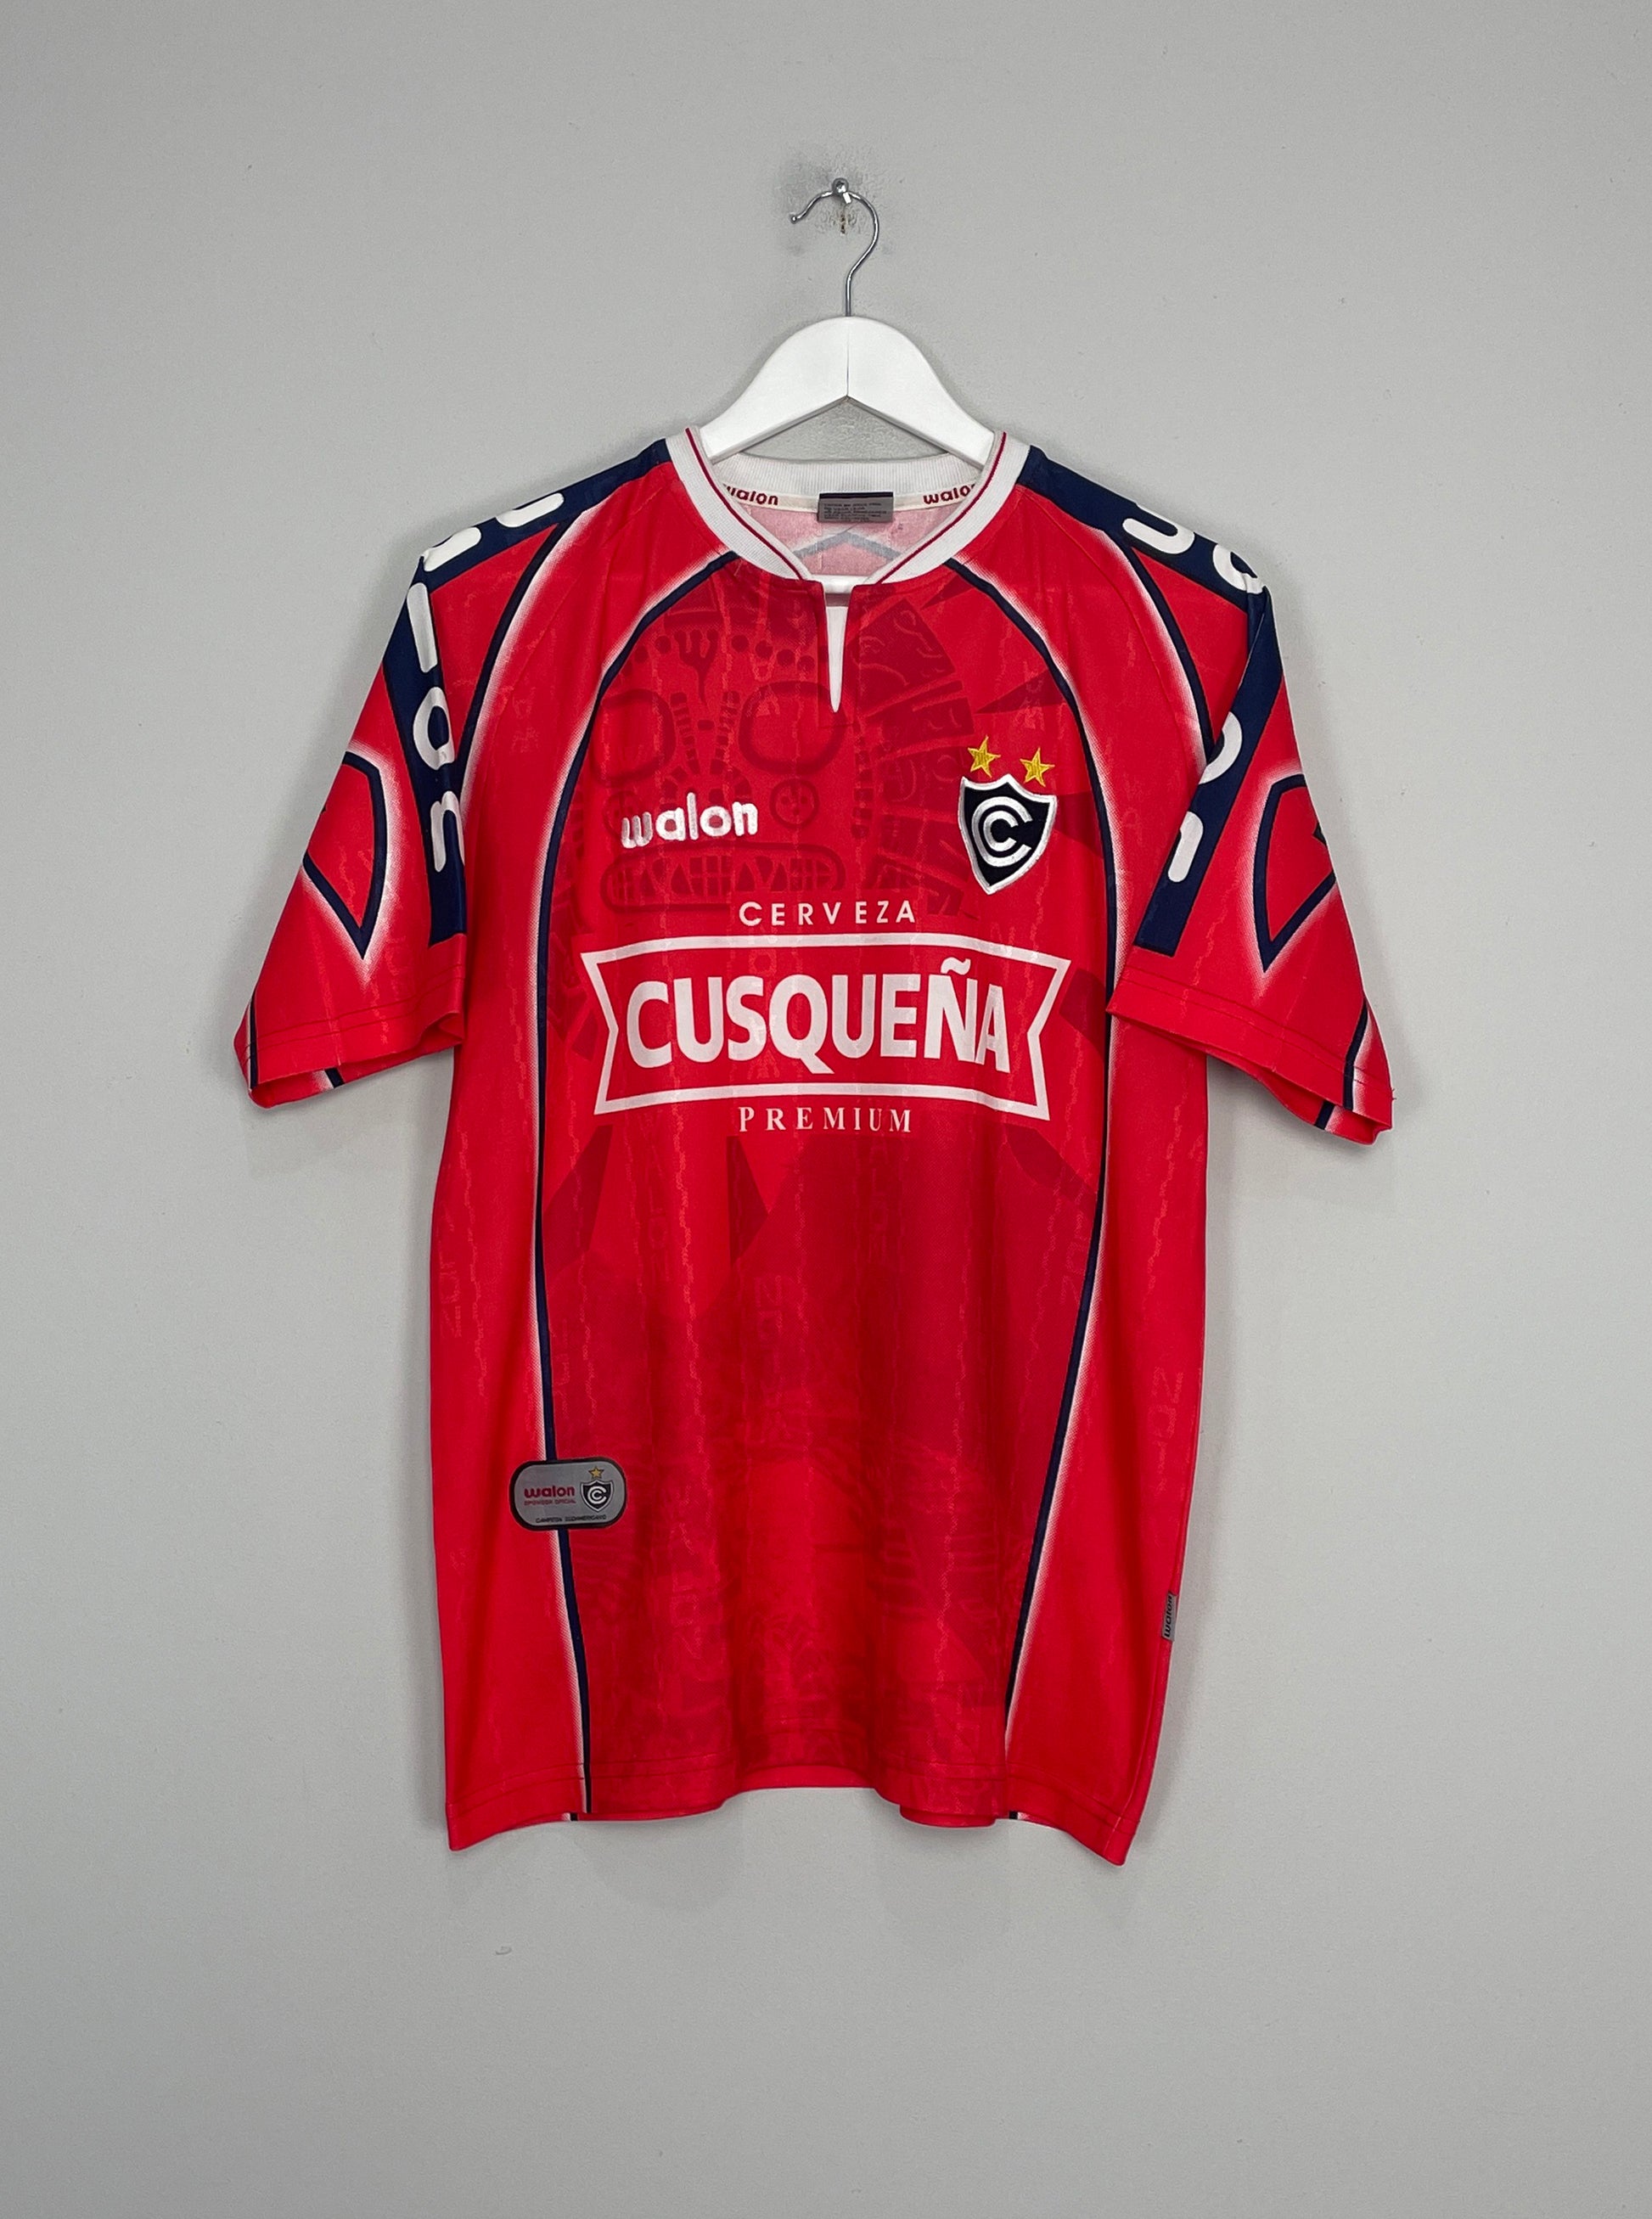 Image of the Club Cienciano shirt from the 2004/05 season